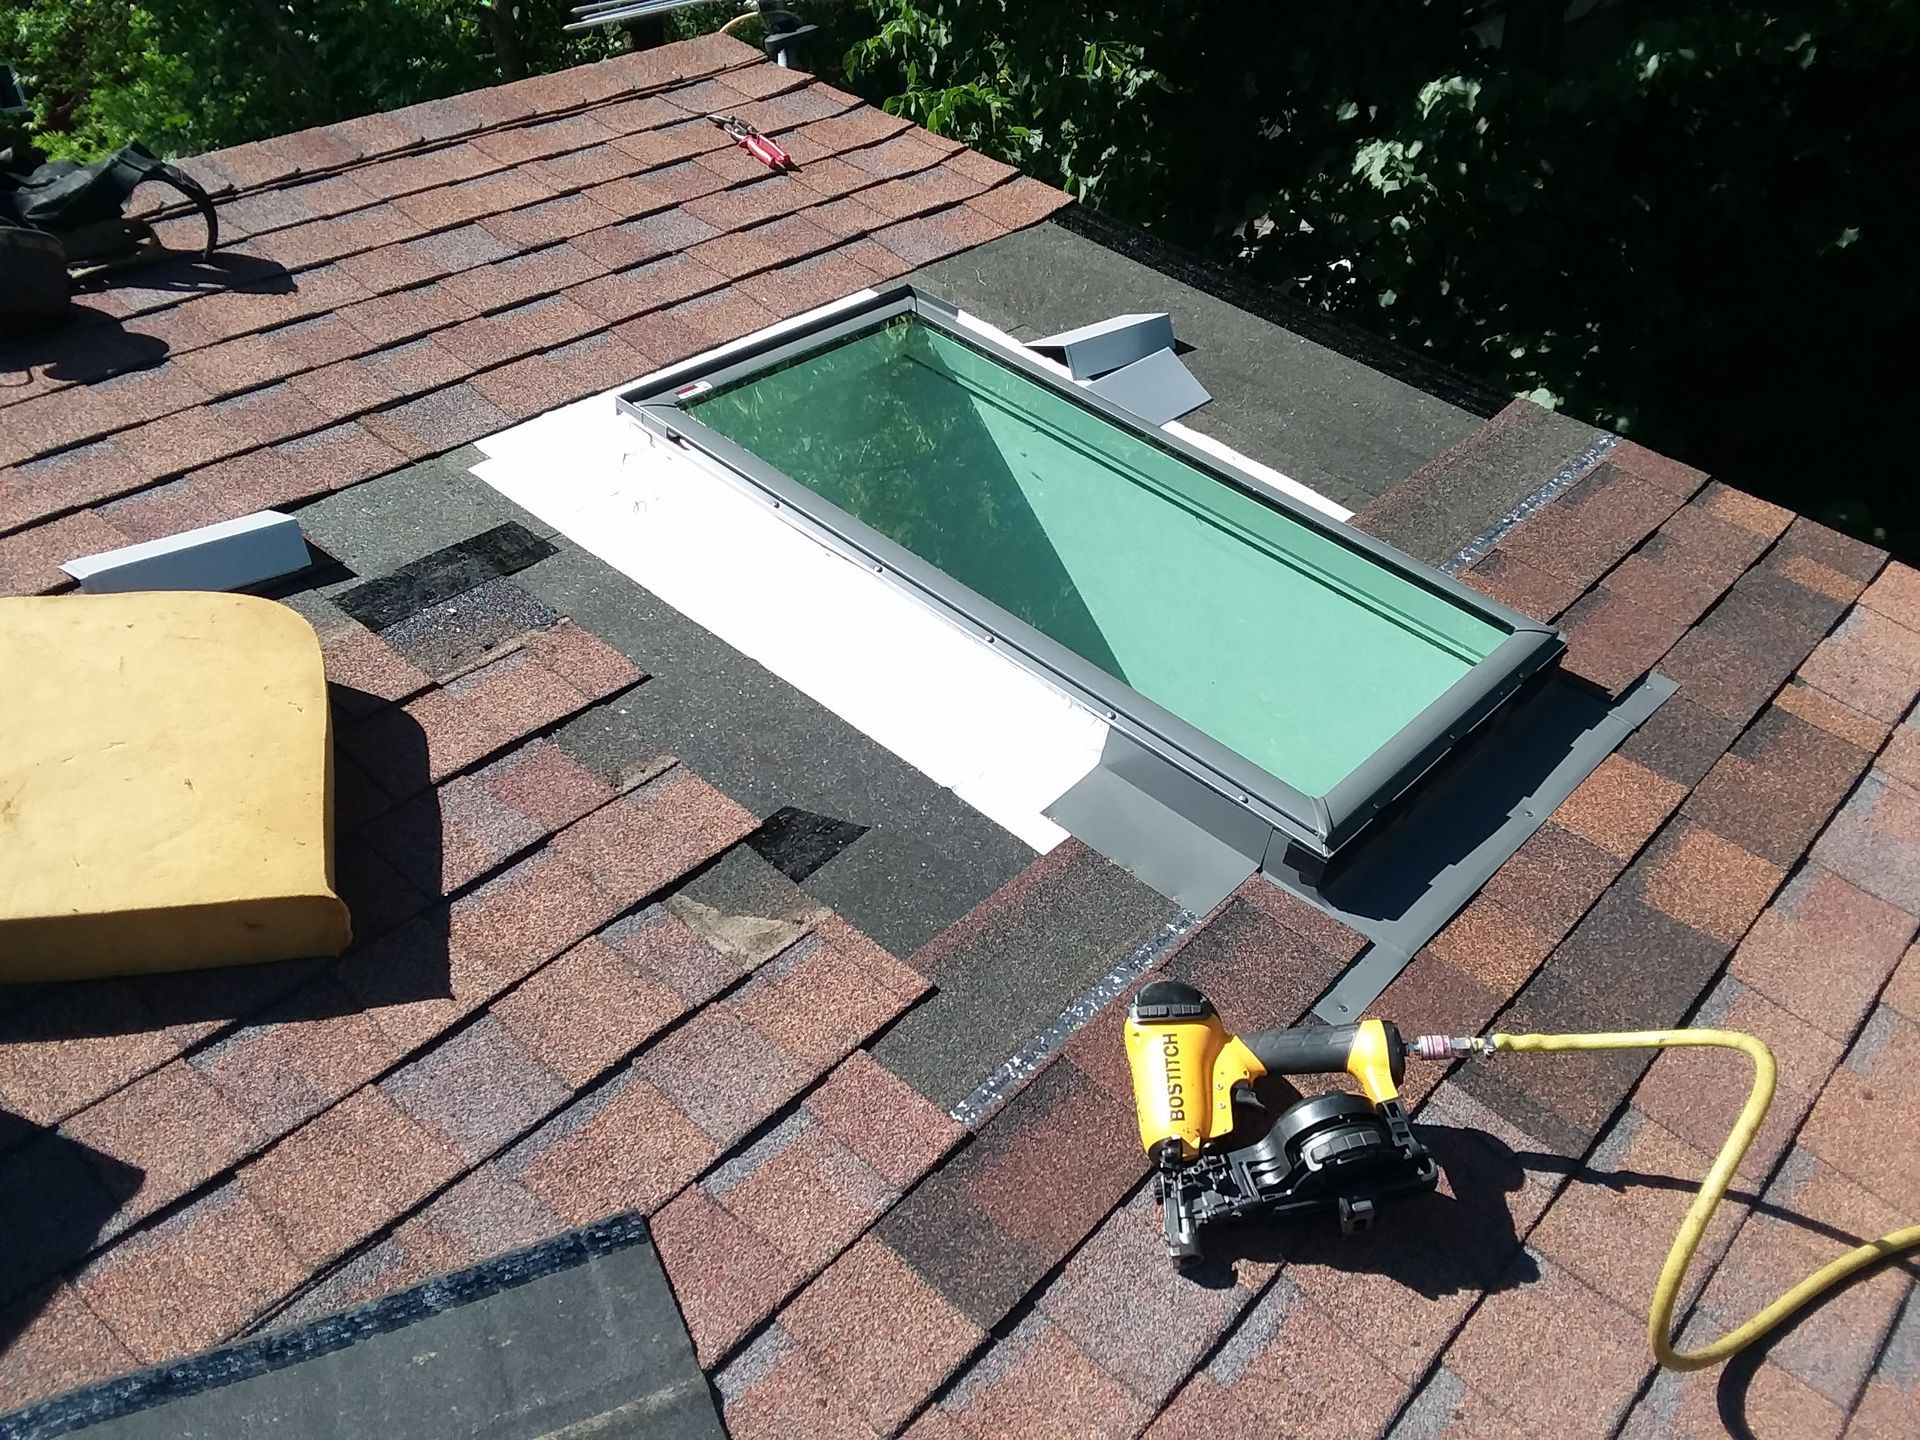 Leaking skylight roof window replaced using a new metal flashing kit, pneumatic tool and hand tools near Fargo-Moorhead